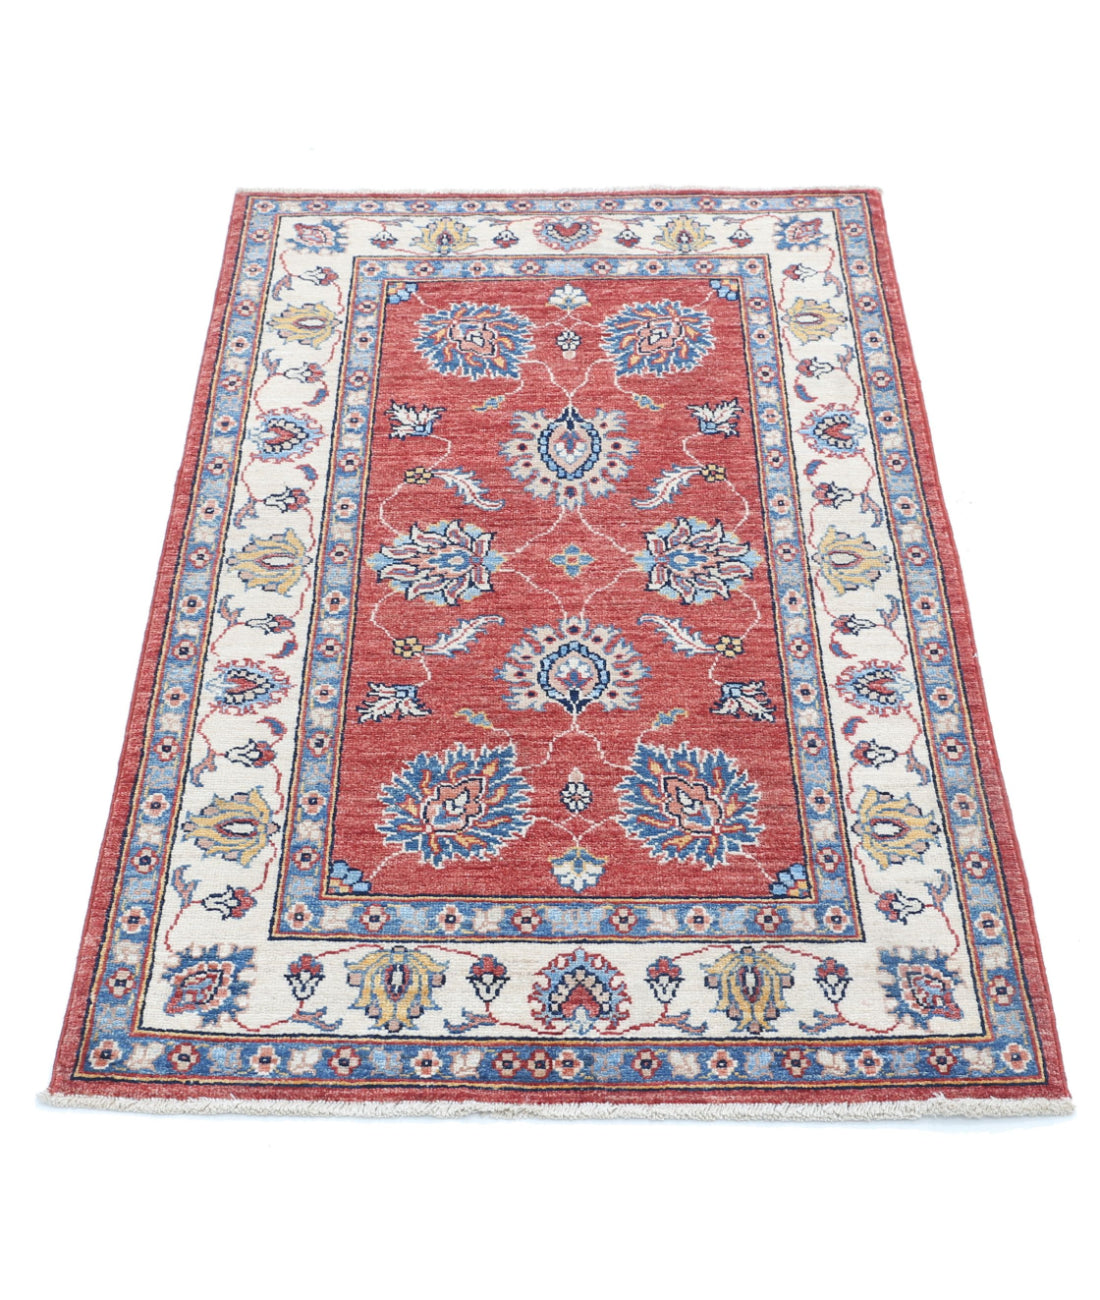 Ziegler 2'6'' X 4'0'' Hand-Knotted Wool Rug 2'6'' x 4'0'' (75 X 120) / Red / Ivory